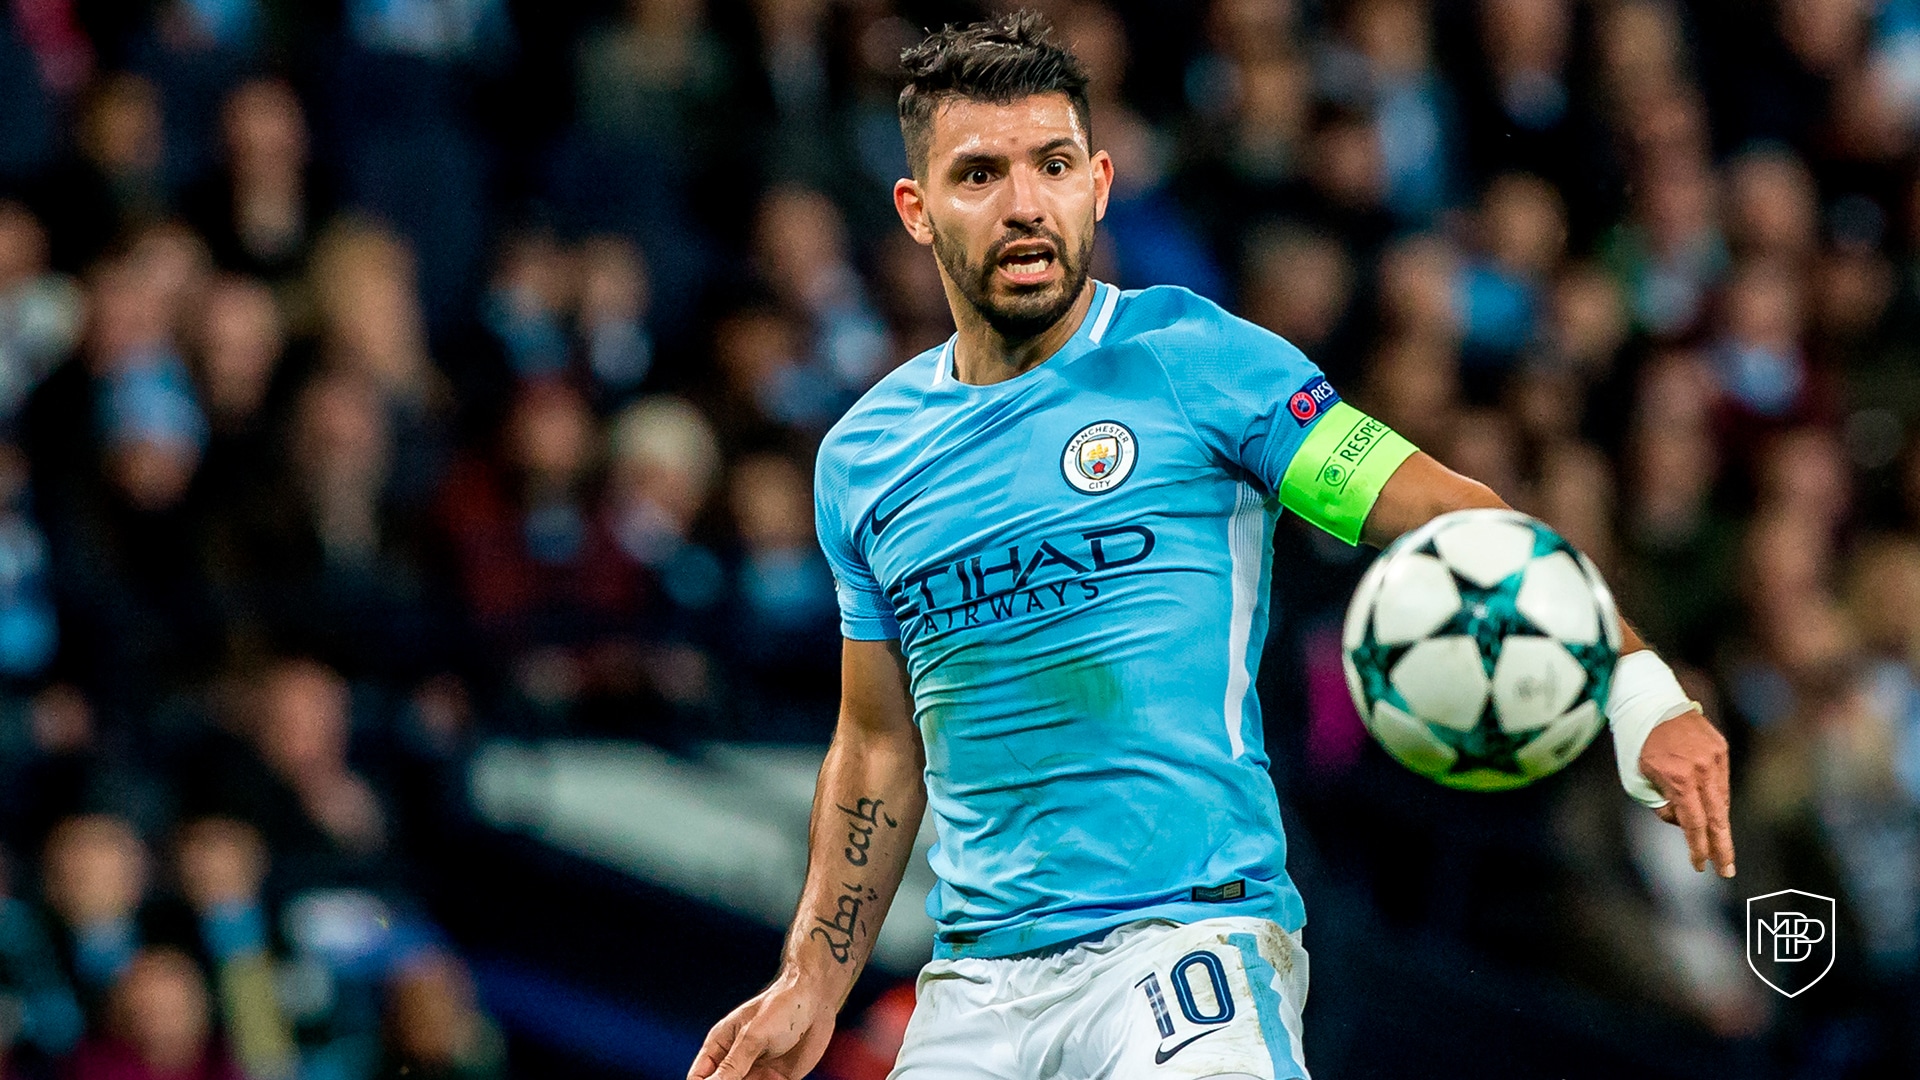 You are currently viewing SERGIO AGUERO: ANALYZING A LEGEND